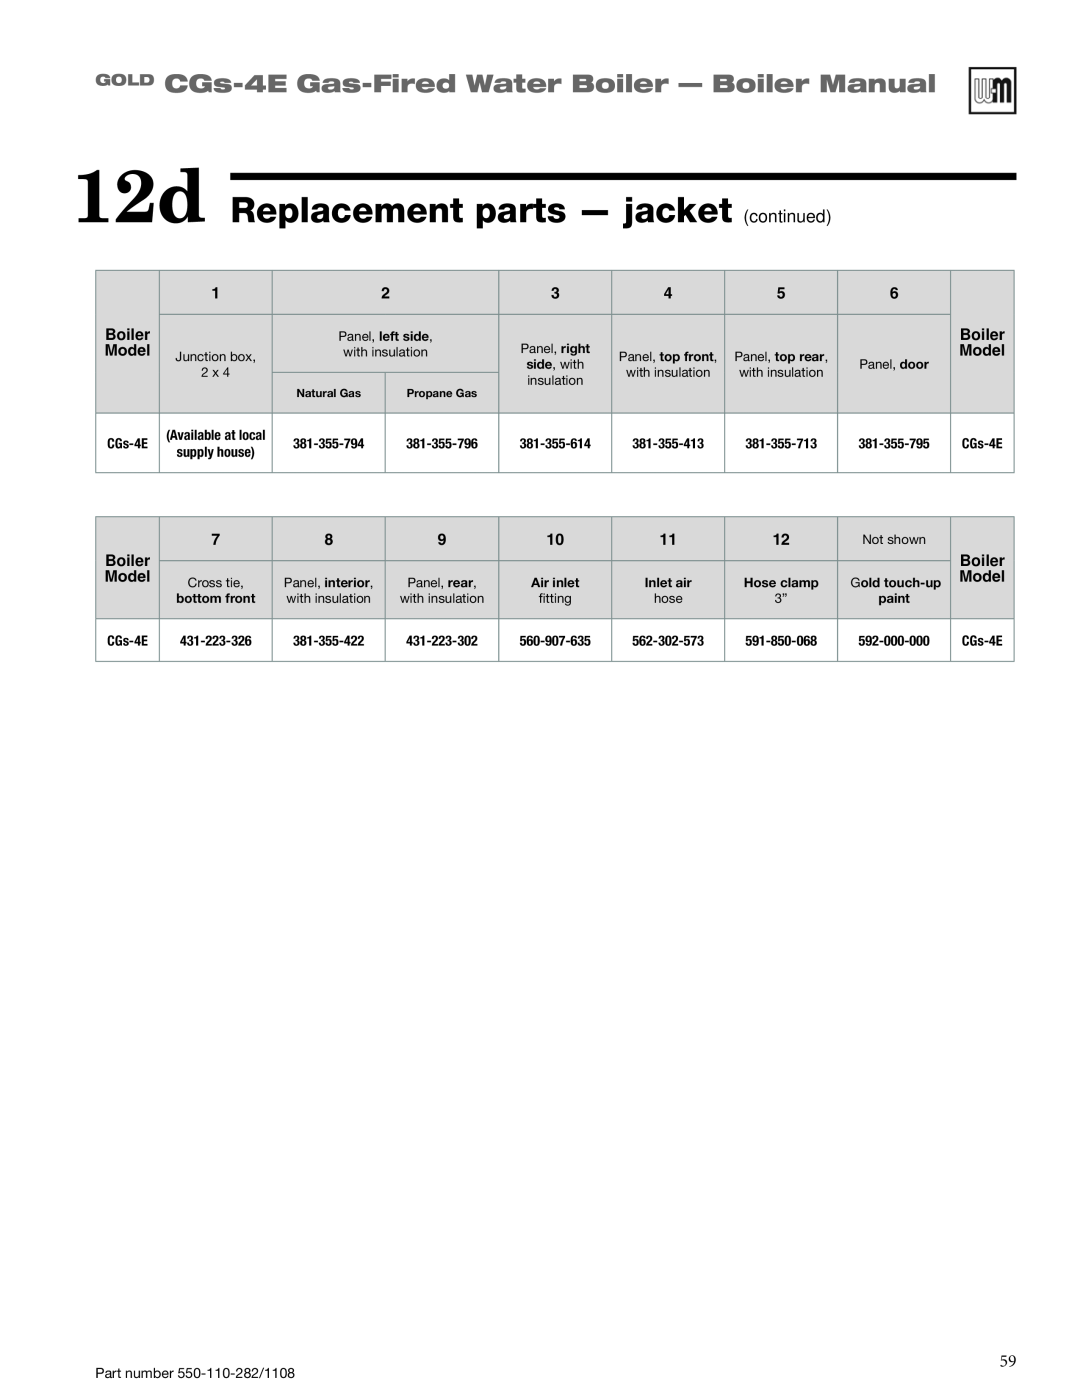 Weil-McLain CGS-4E manual 12d Replacement parts - jacket continued, GOLD CGs-4E Gas-FiredWater Boiler - Boiler Manual 